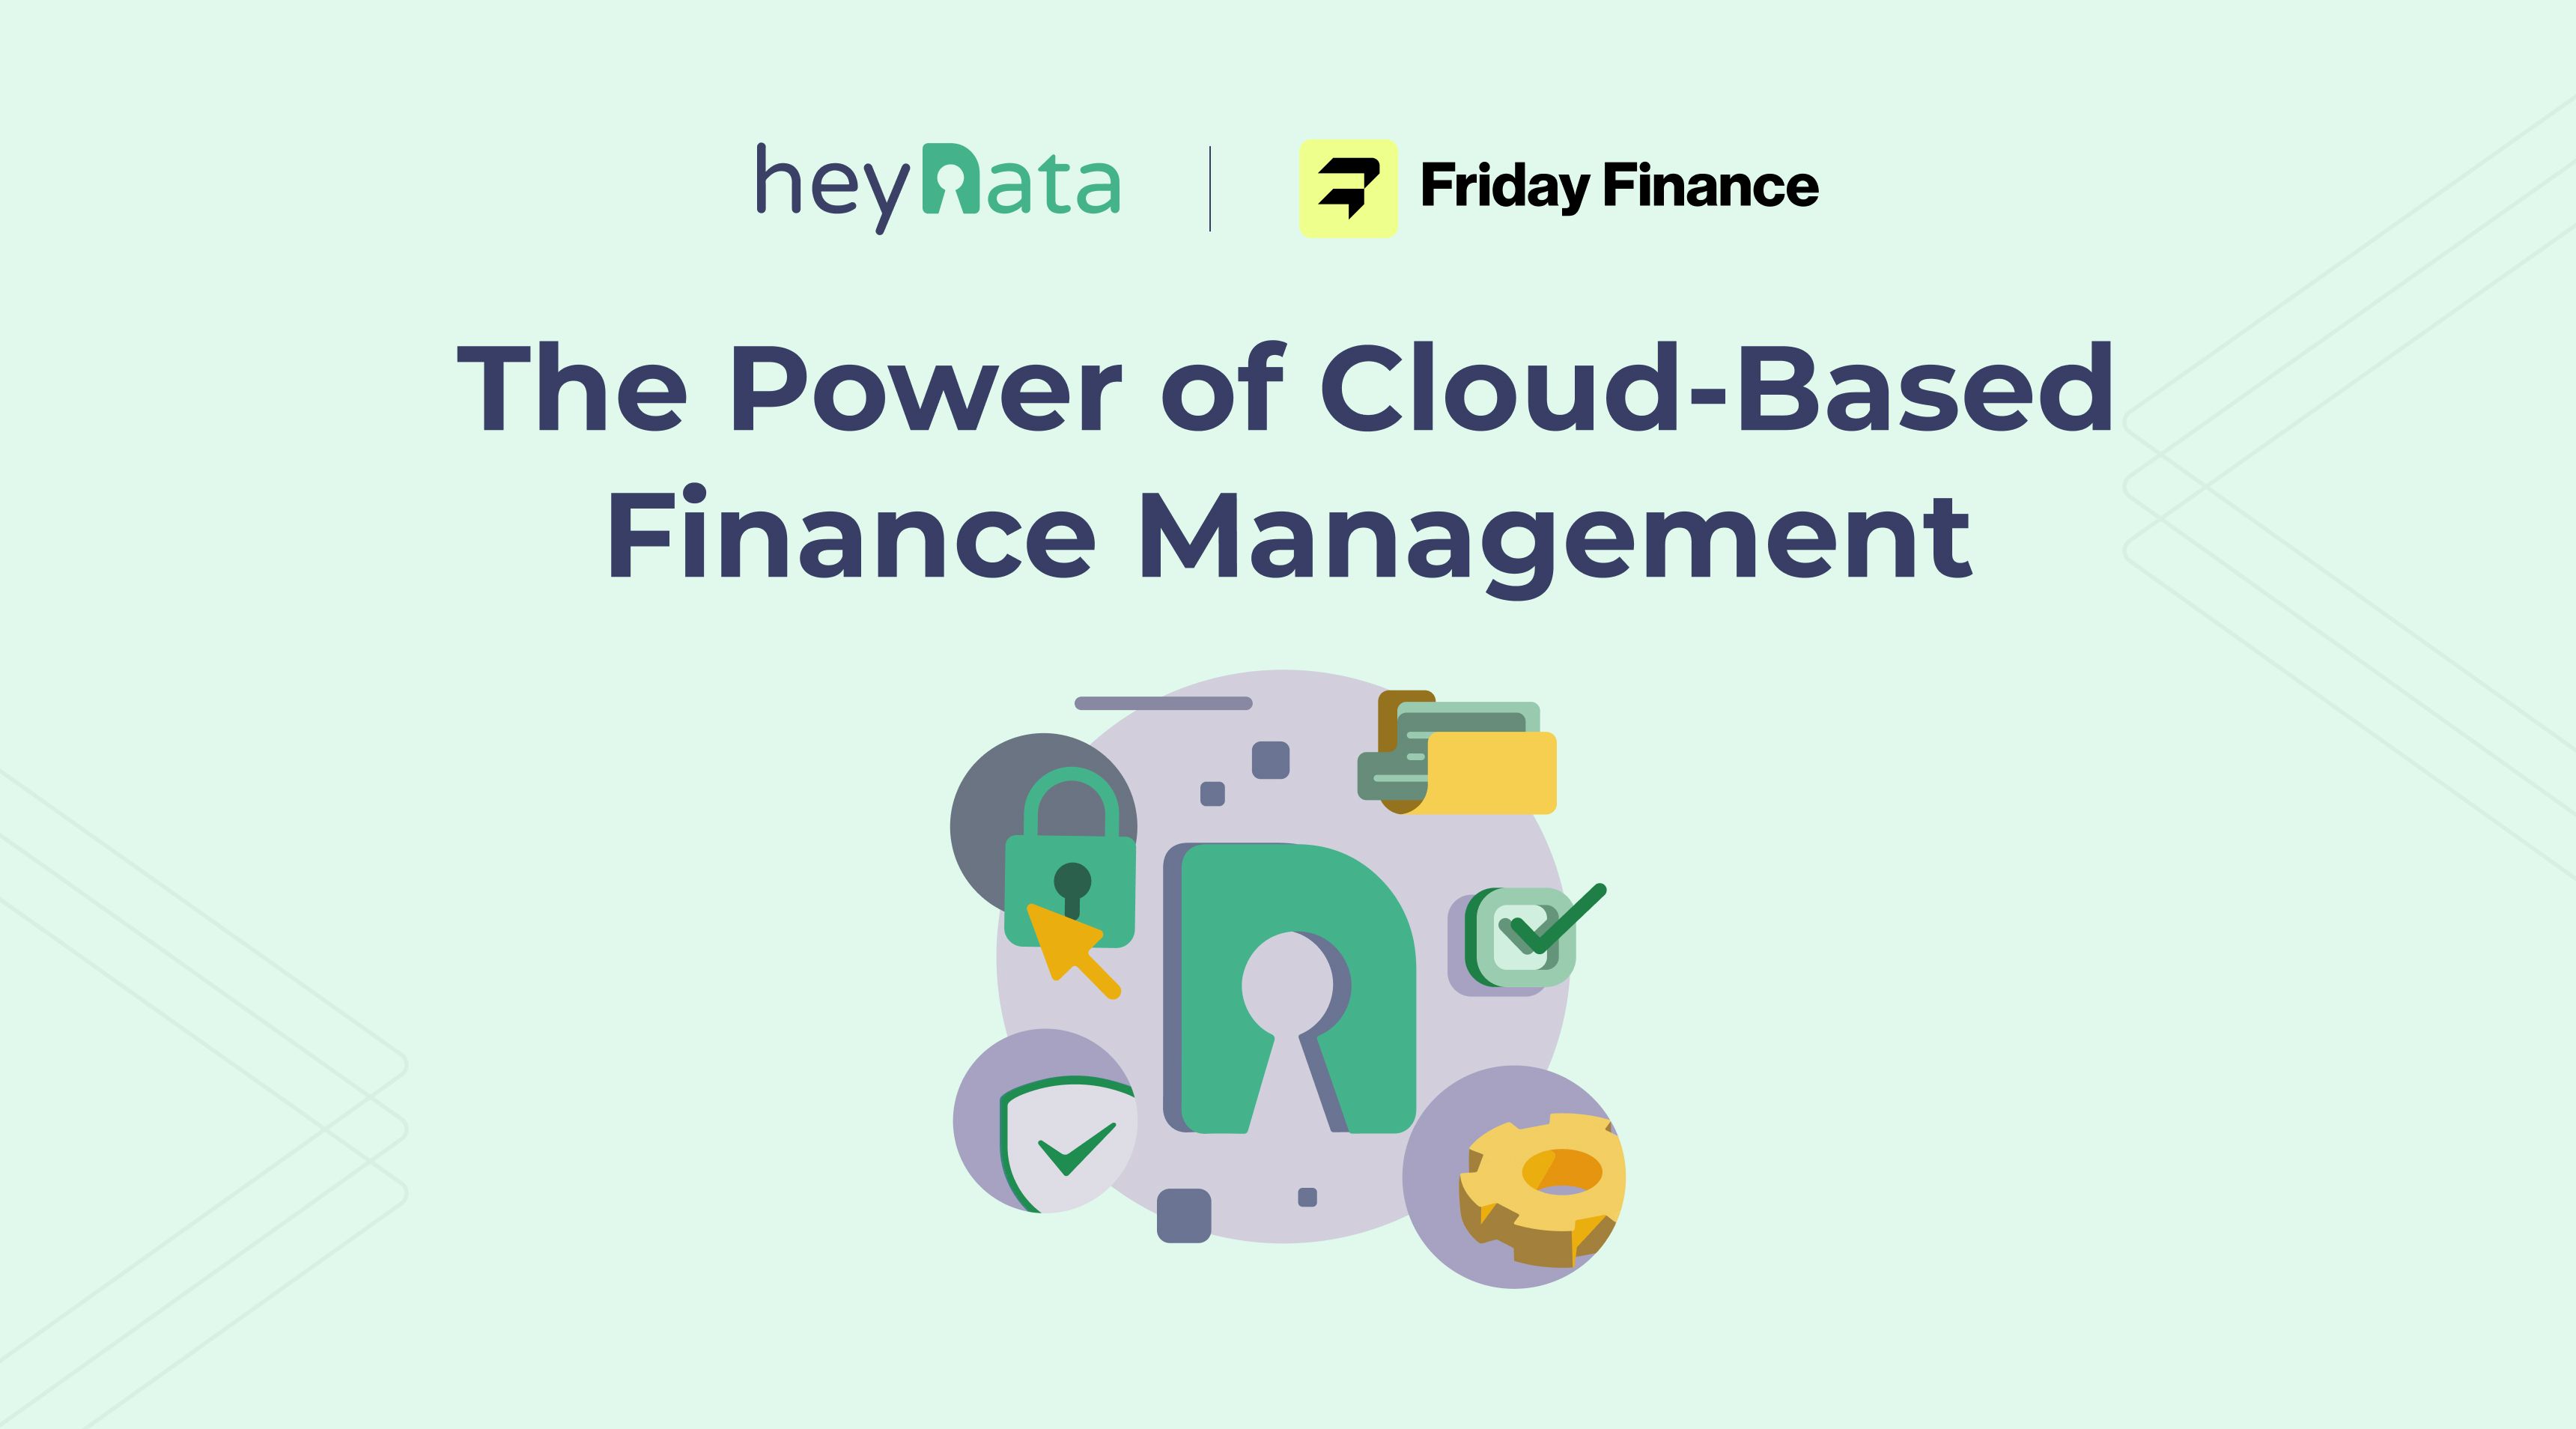 The Power of CLoud-Based Finance Management